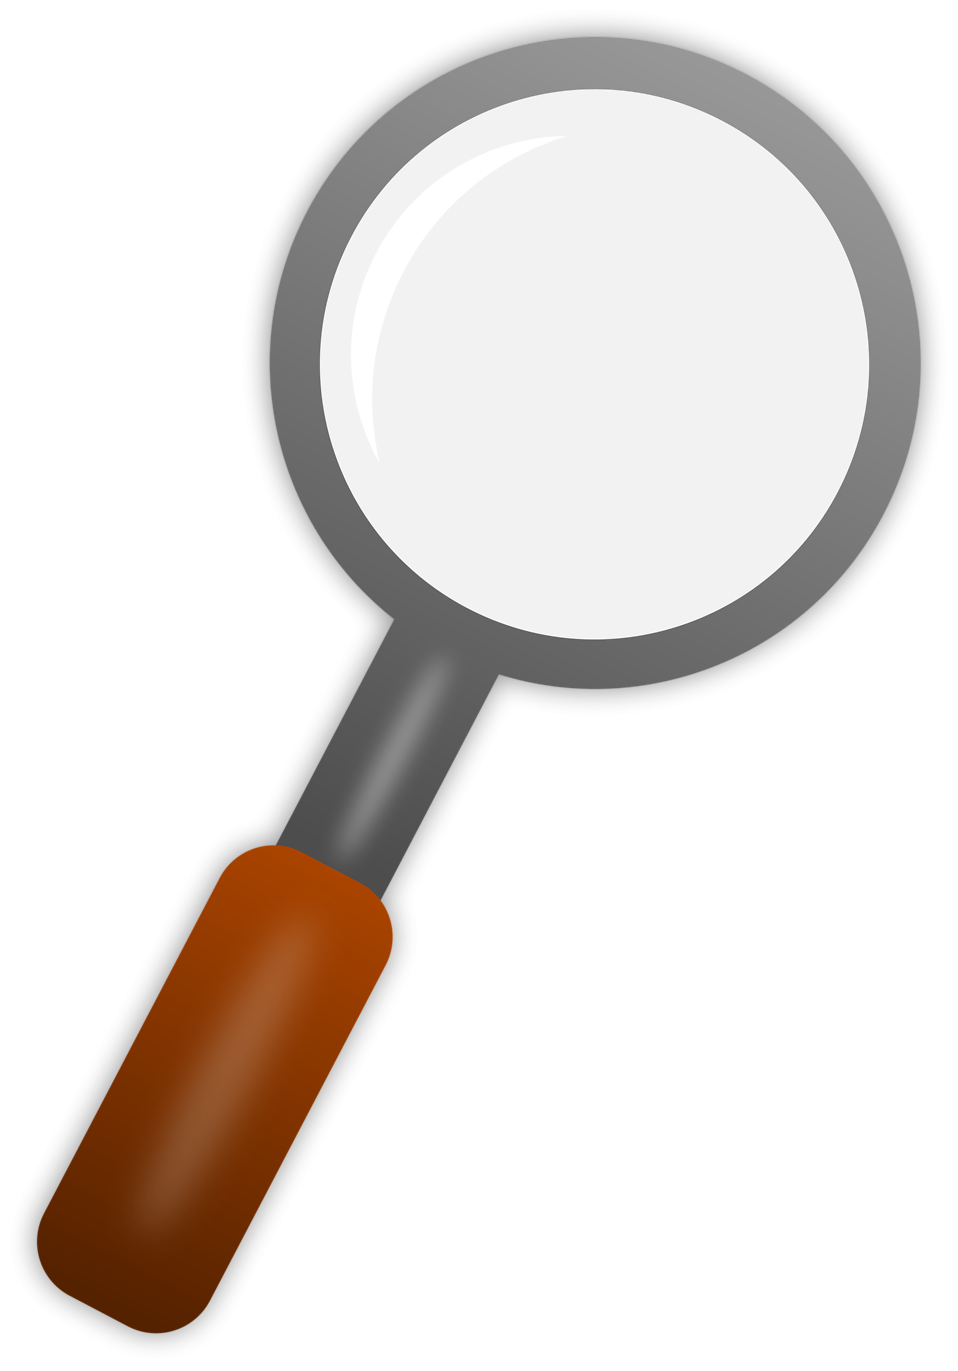 free clipart images magnifying glass - photo #34